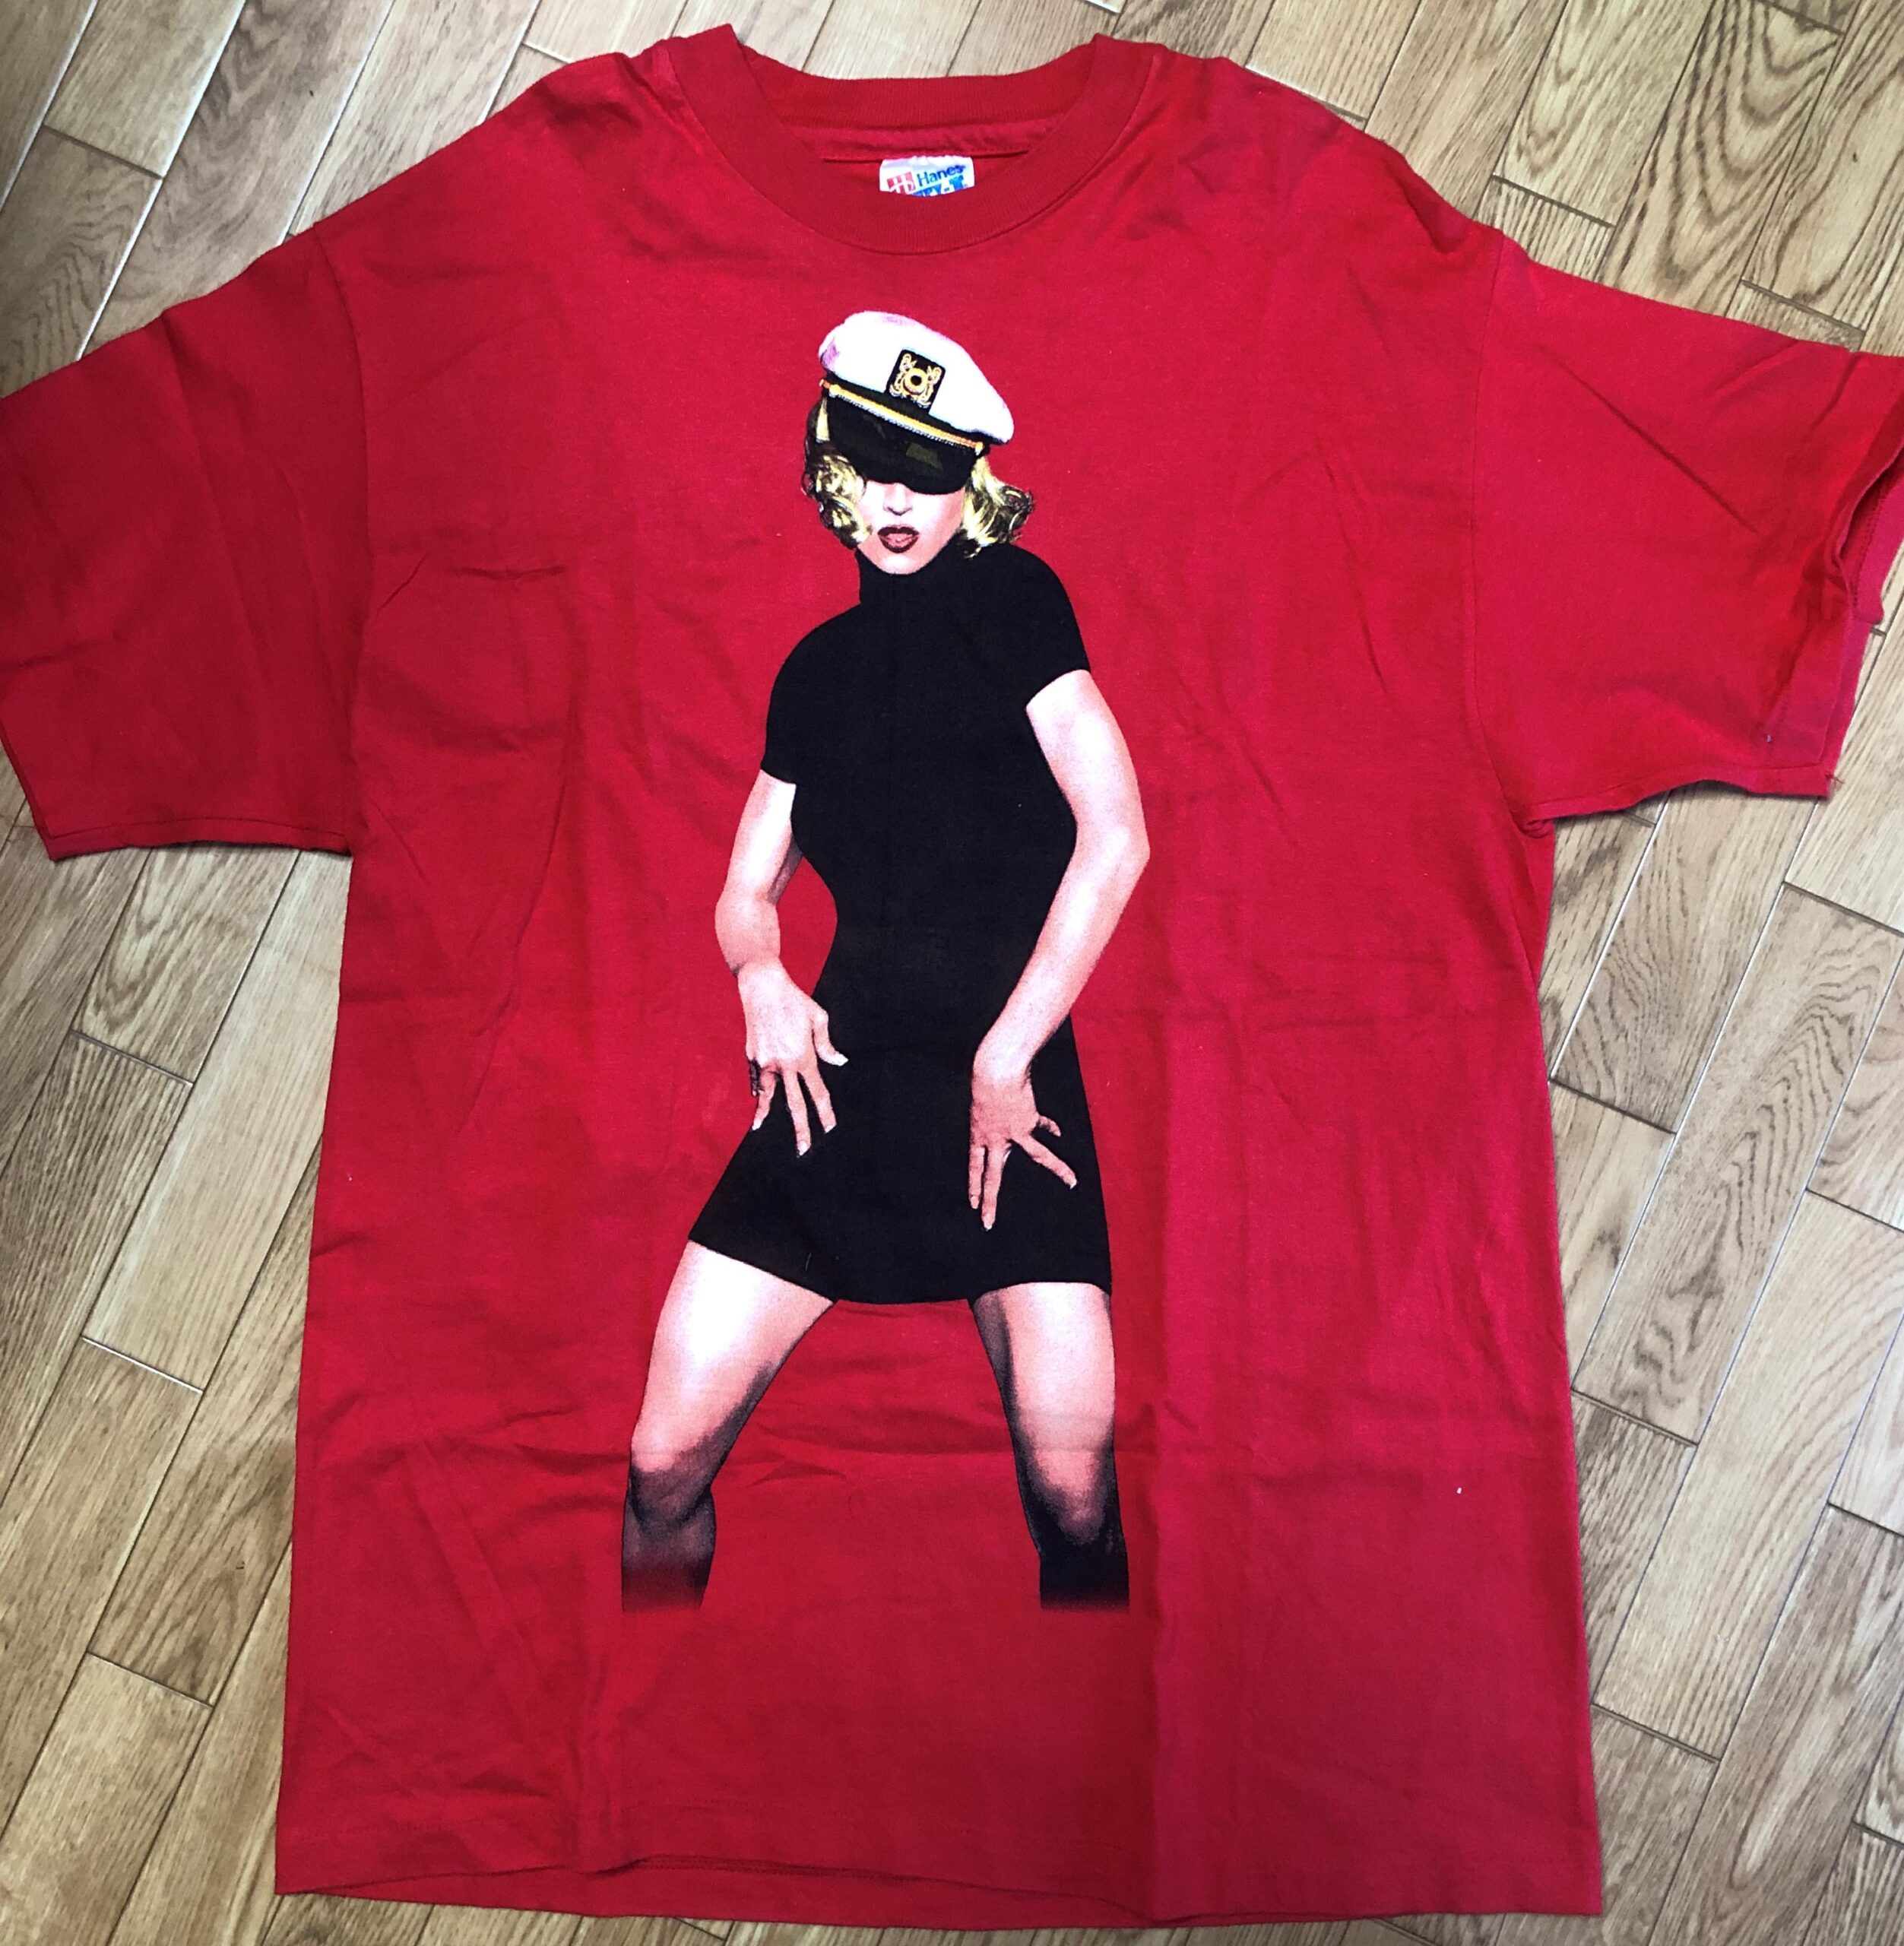 Madonna ☆ Girlie Show World Tour 93′ Tee L size RED